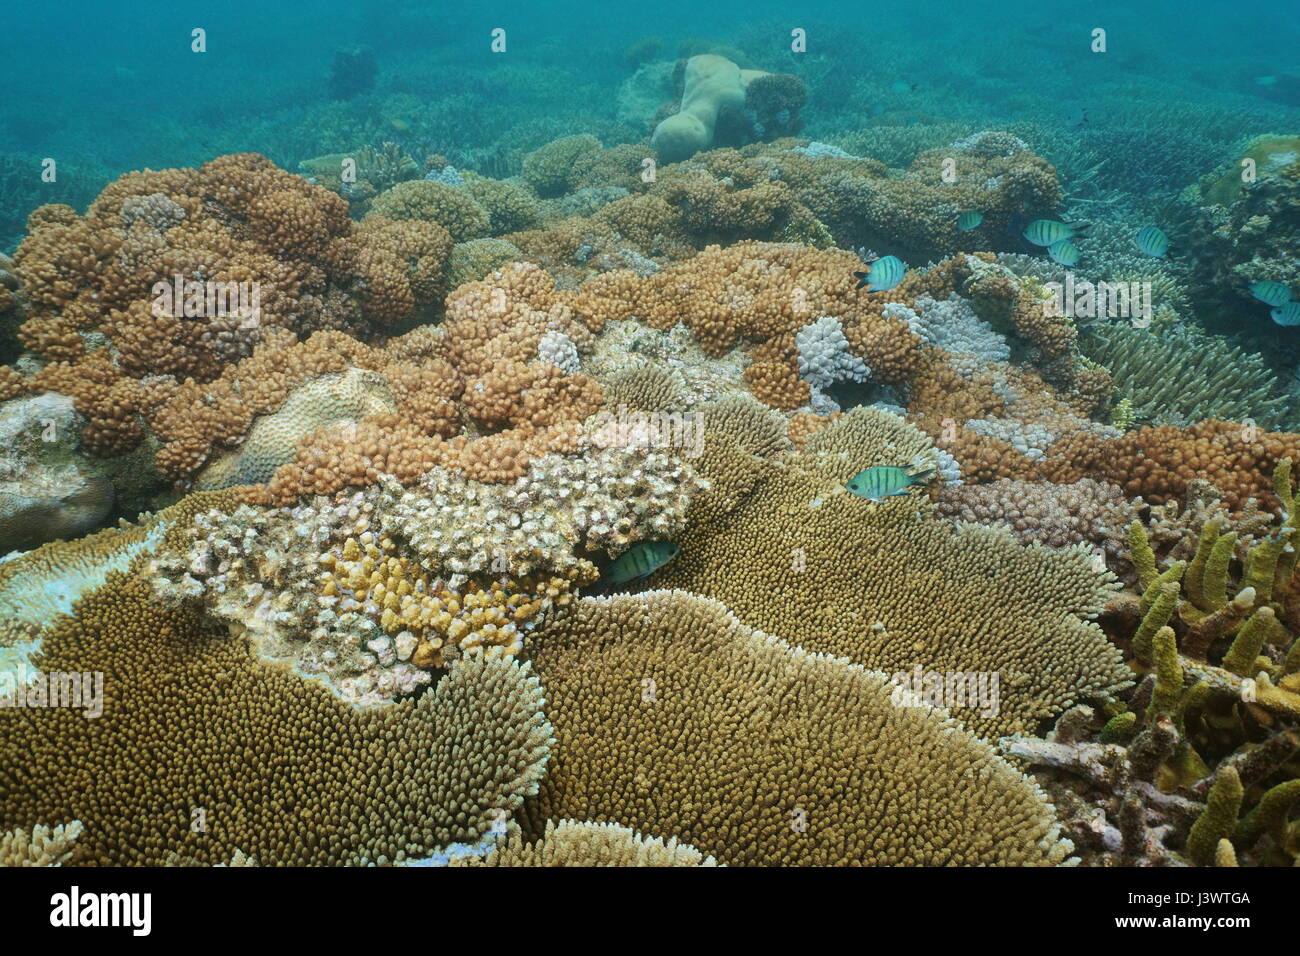 Underwater reef soft and stony corals on the ocean floor, lagoon of Grande-Terre island, New Caledonia, south Pacific Stock Photo